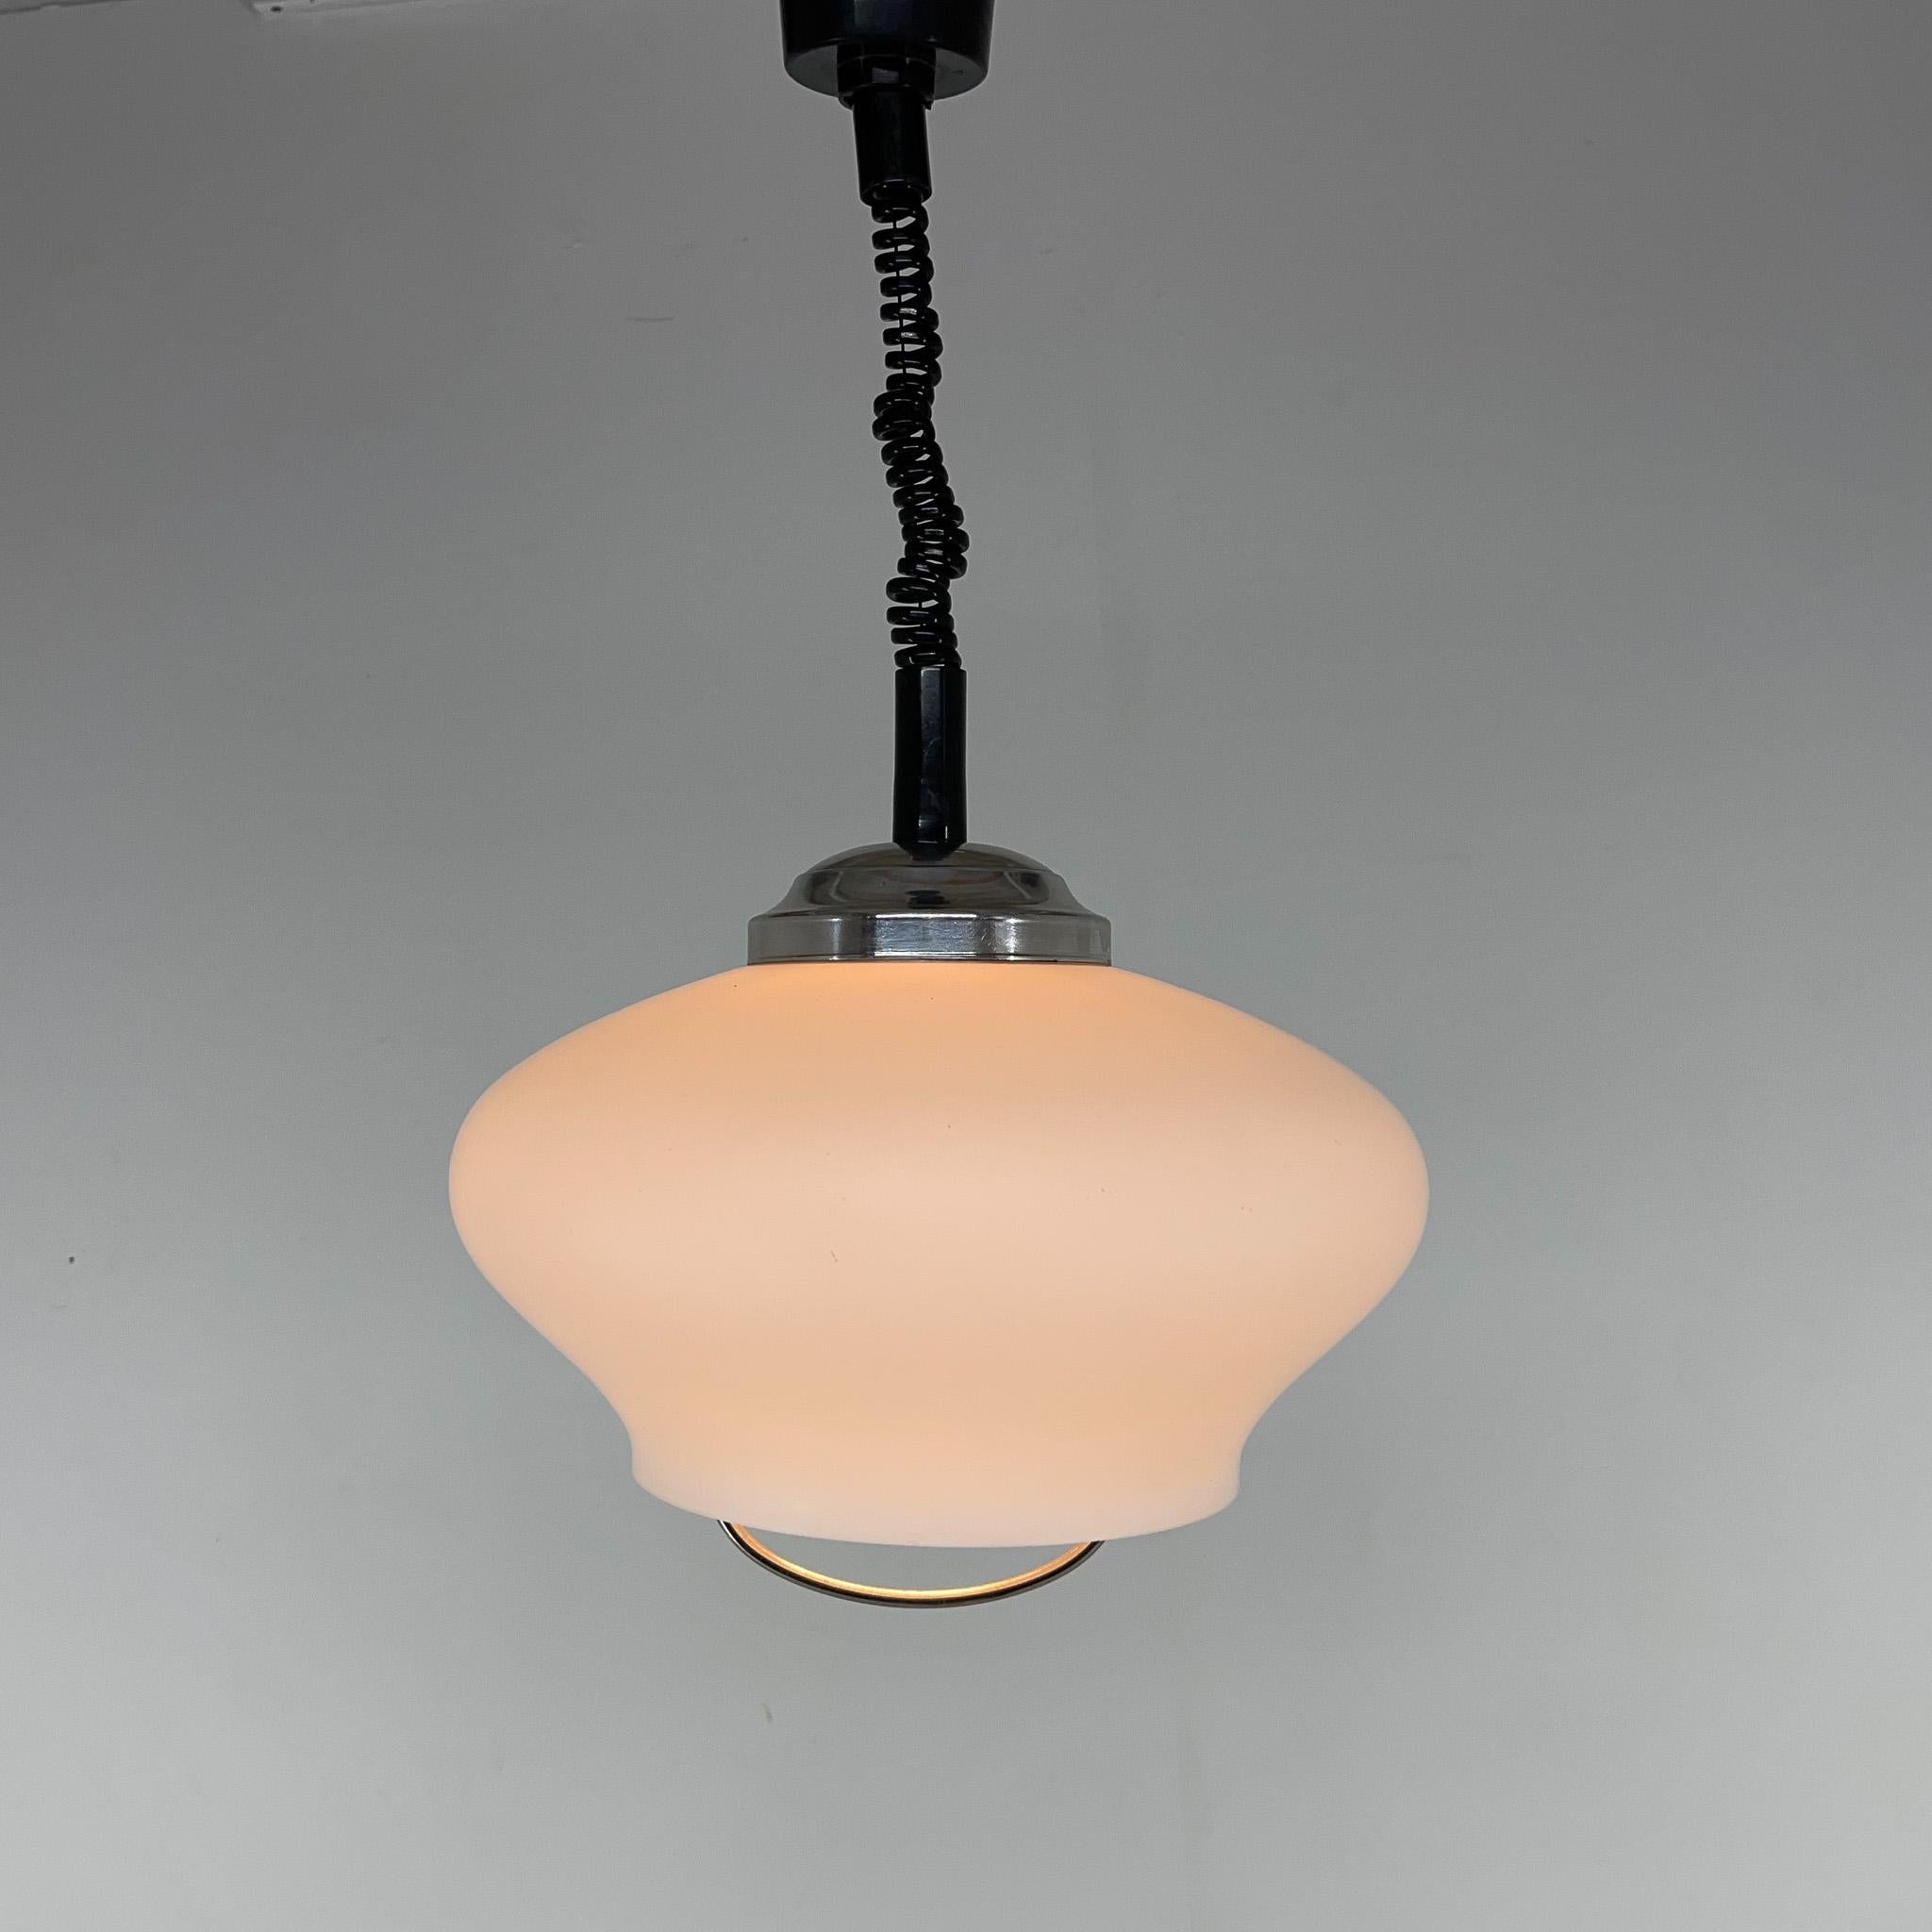 Vintage pendant light made of milk glass. The height is adjustable and it stretches up to 120 cm. There is a tiny chip on the glass (see photo). Overall the pendant is in good vintage condition.